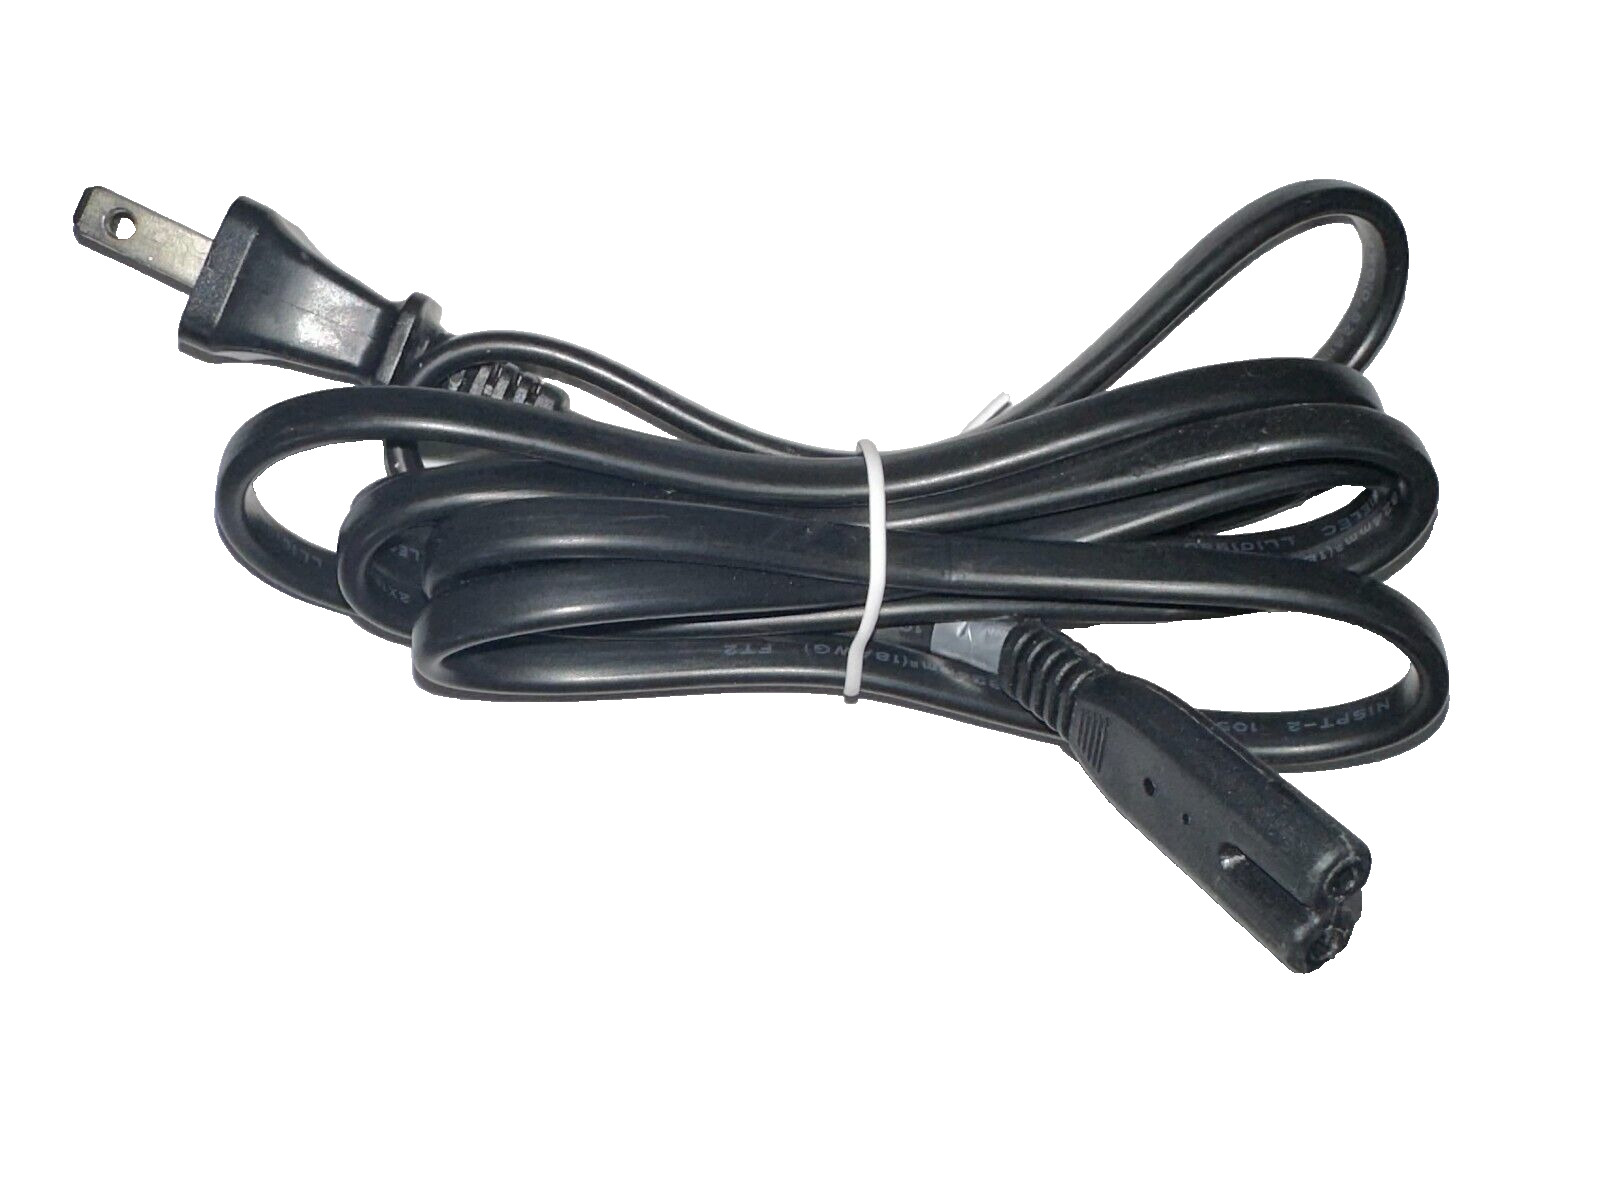 AC power cord for I-SHENG IS-033C E55943 7A 125V 2-PRONG POWER CORD - BLACK 6FT